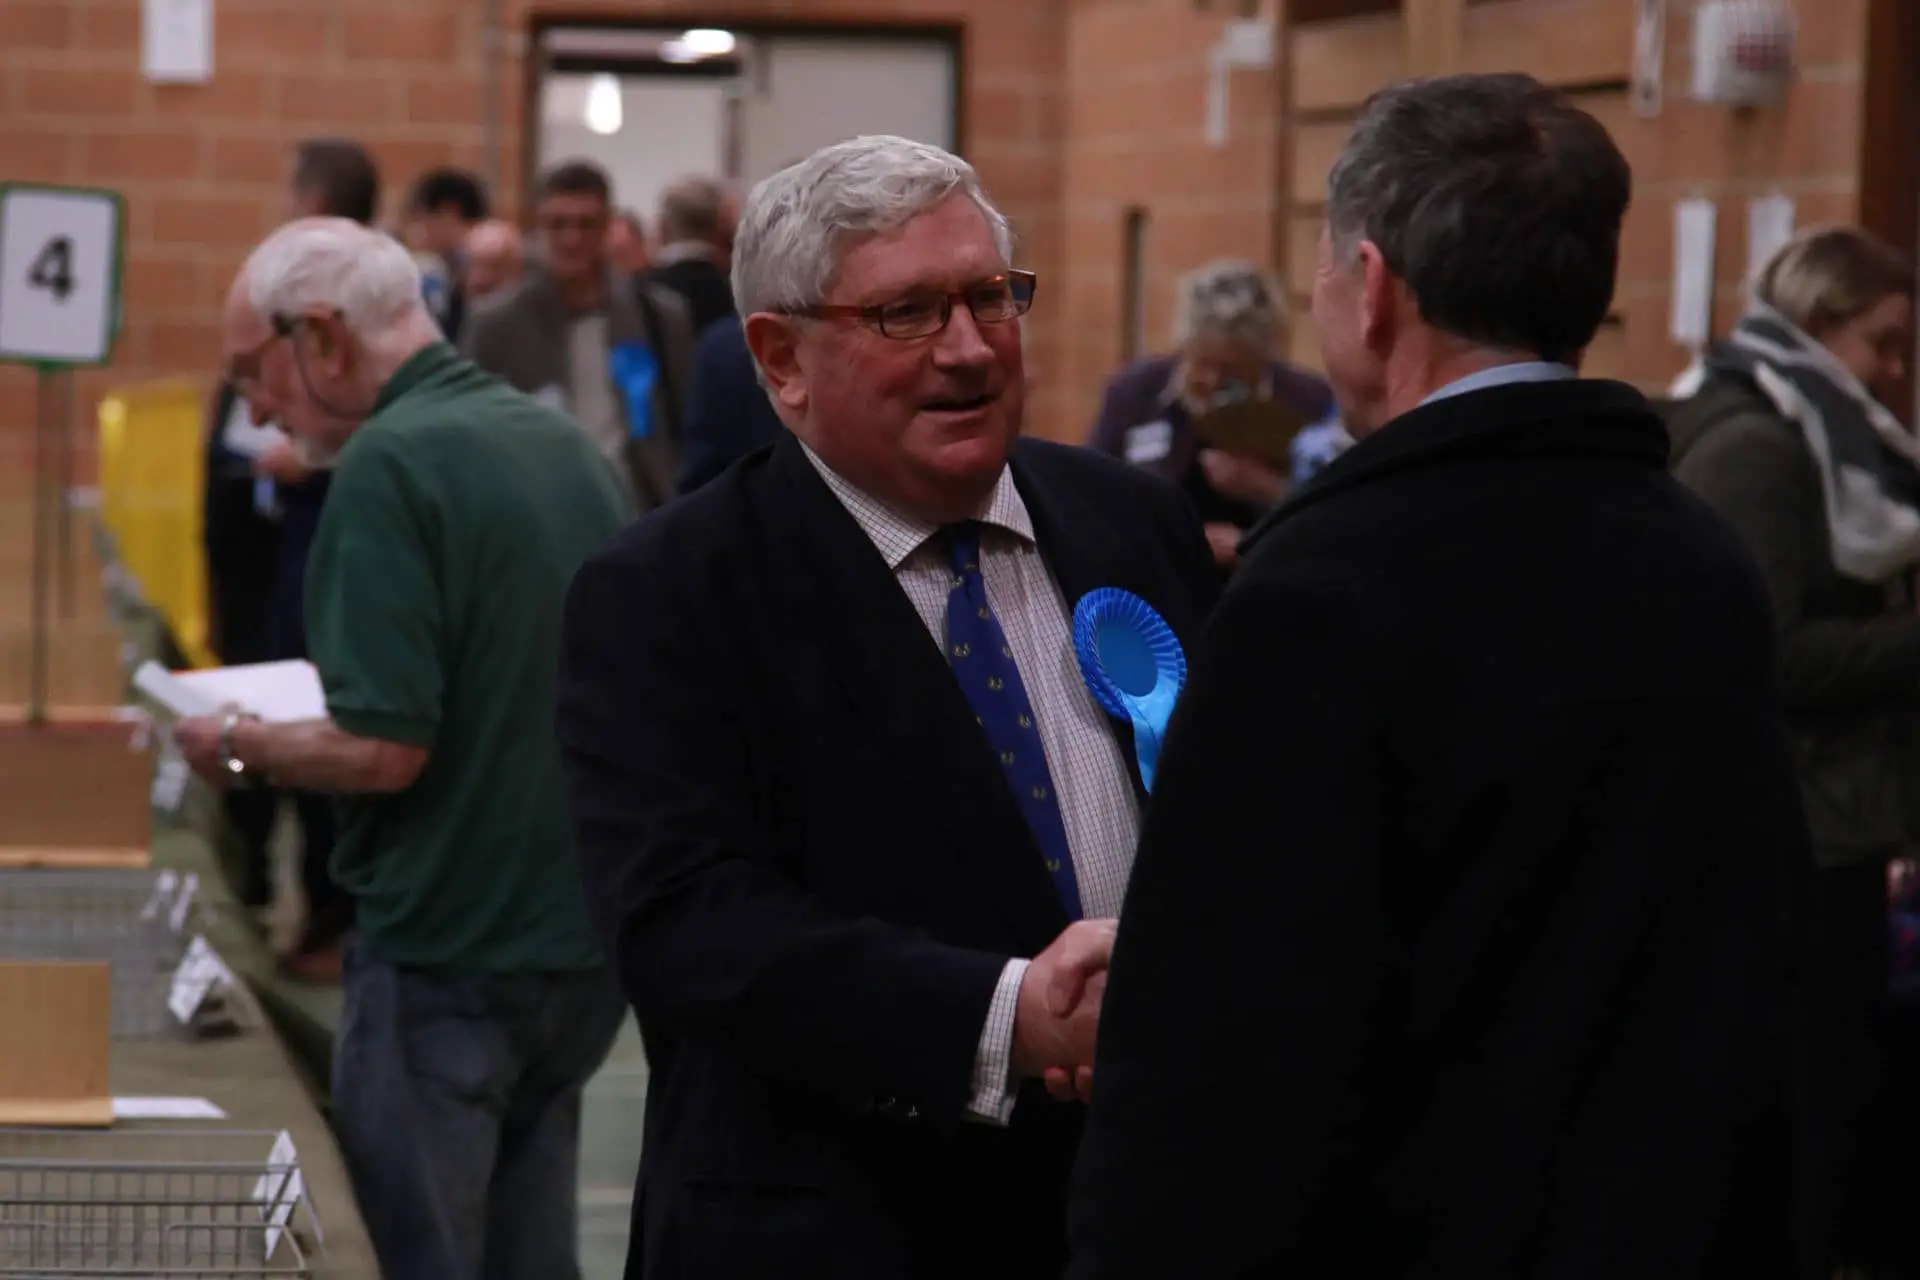 richard hollis shaking hands with nick stuart at the election count